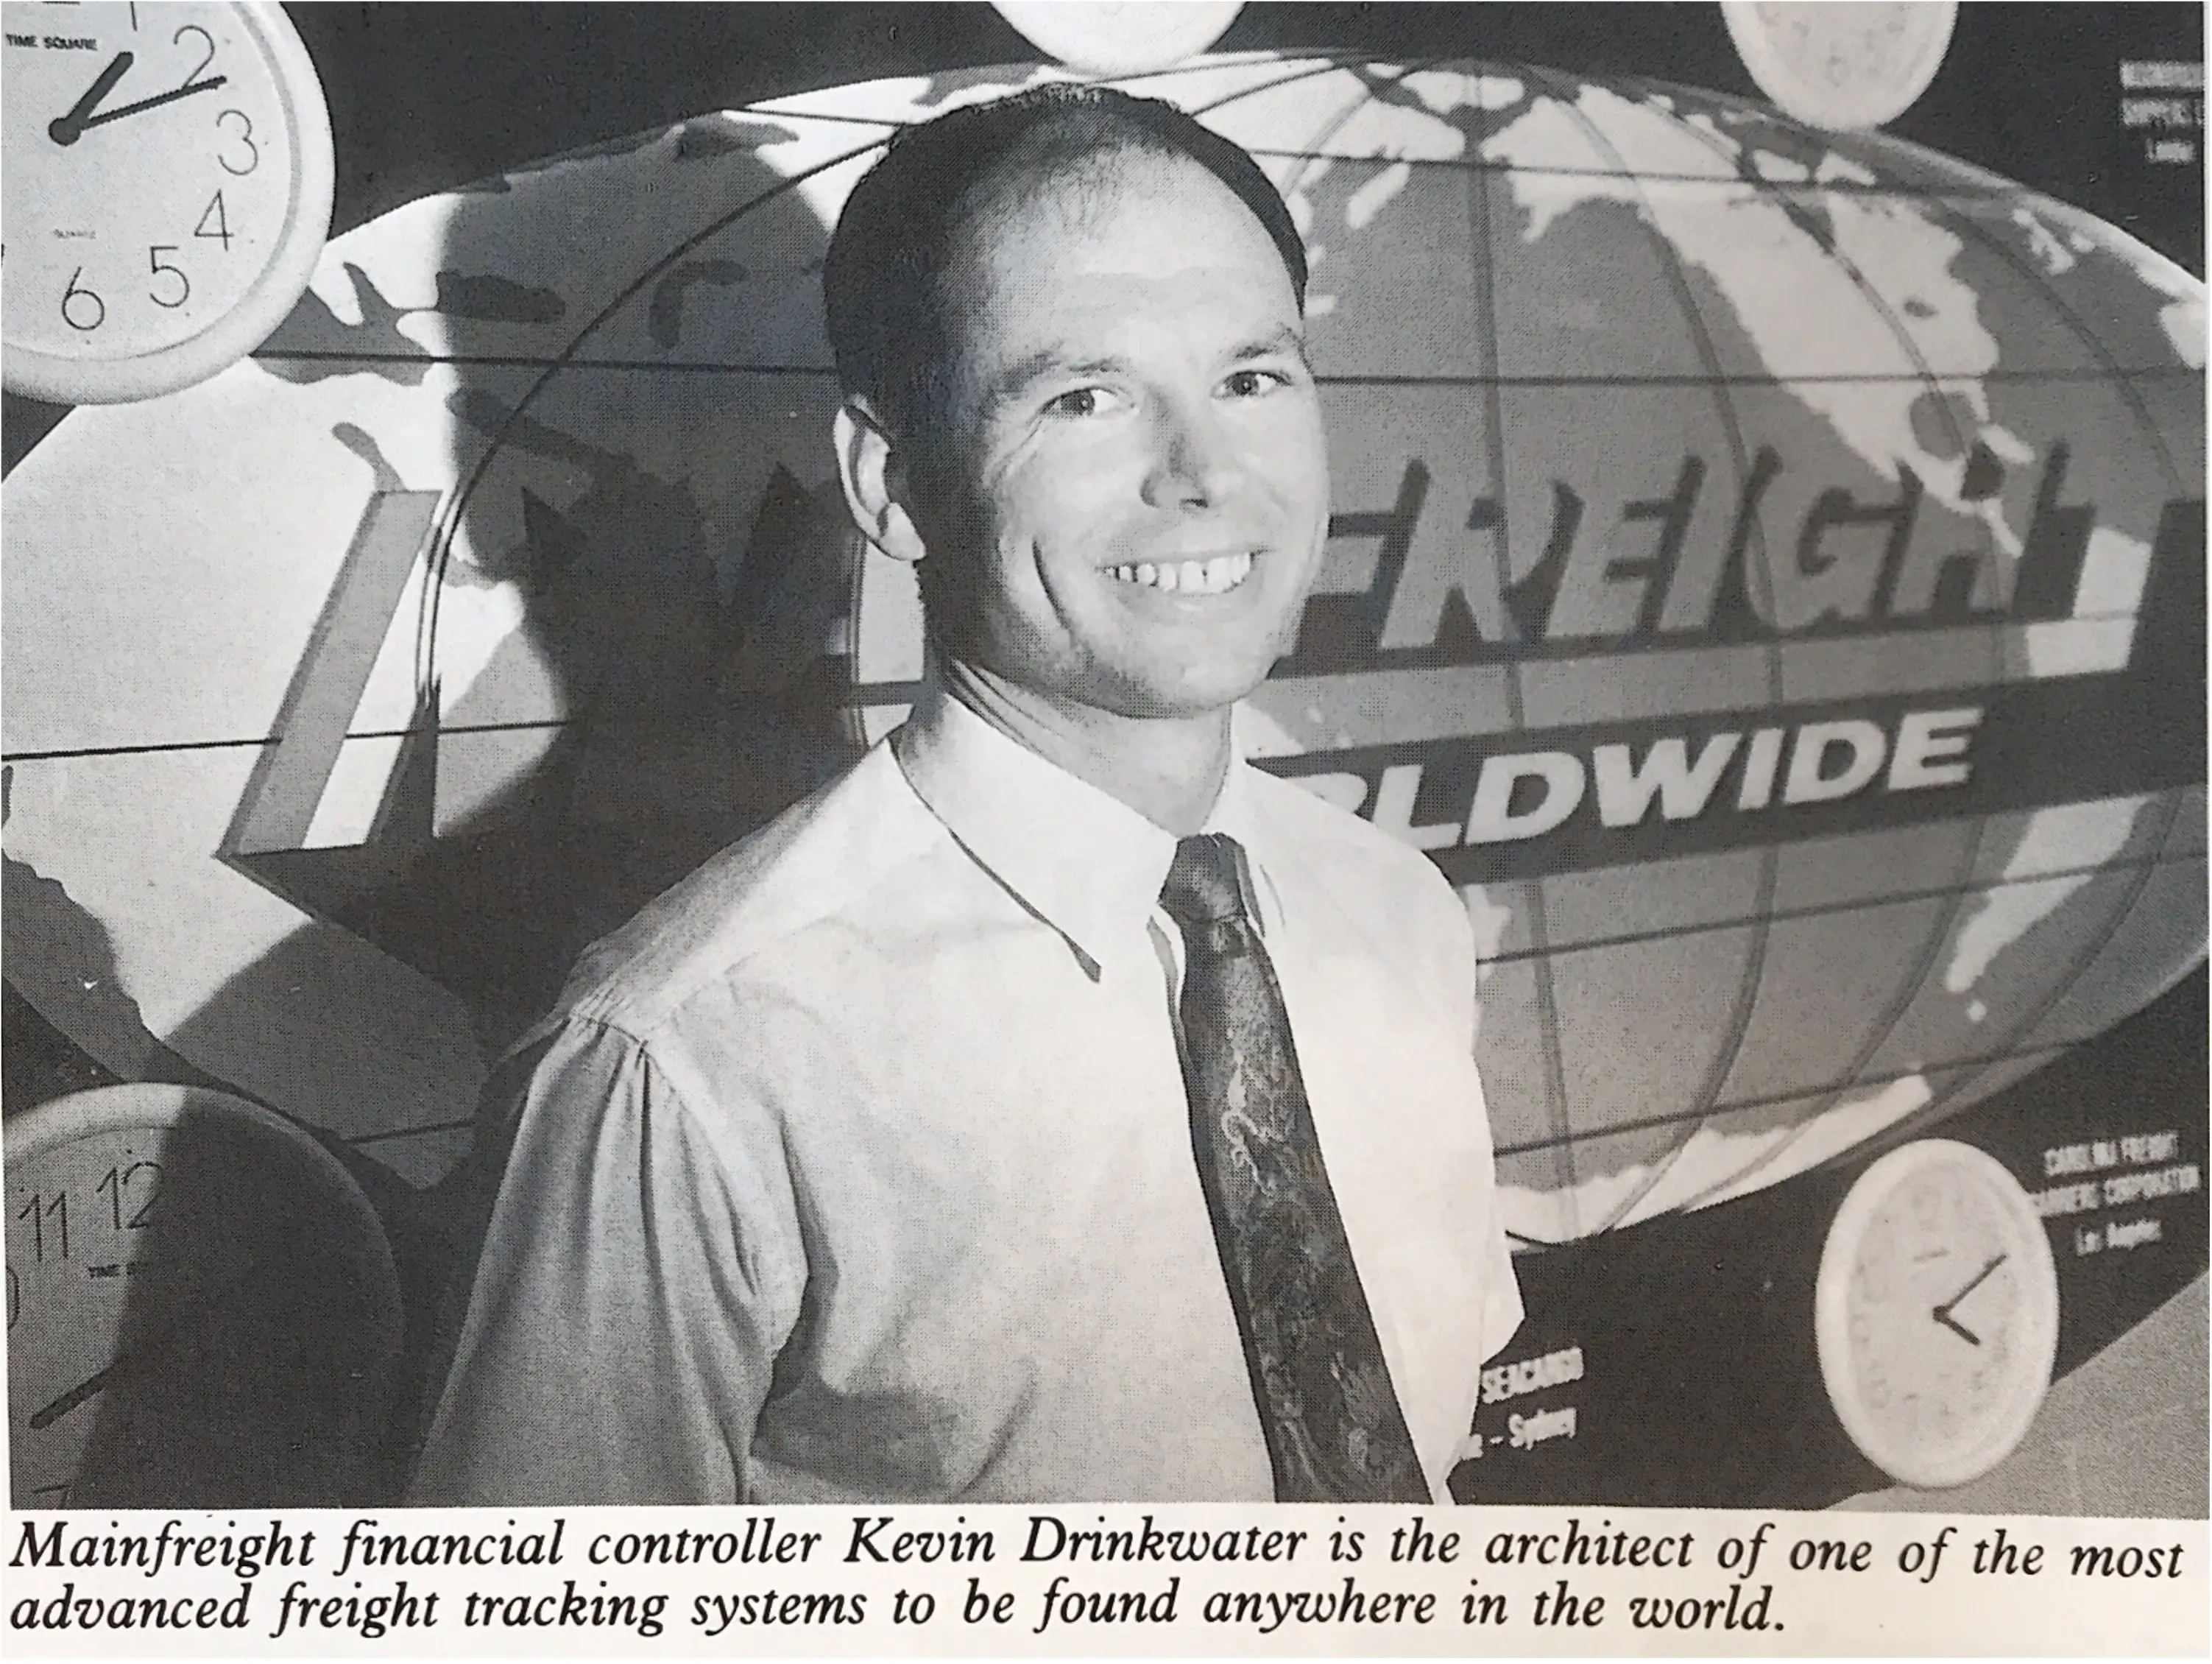 kevin drinkwater in newspaper clipping